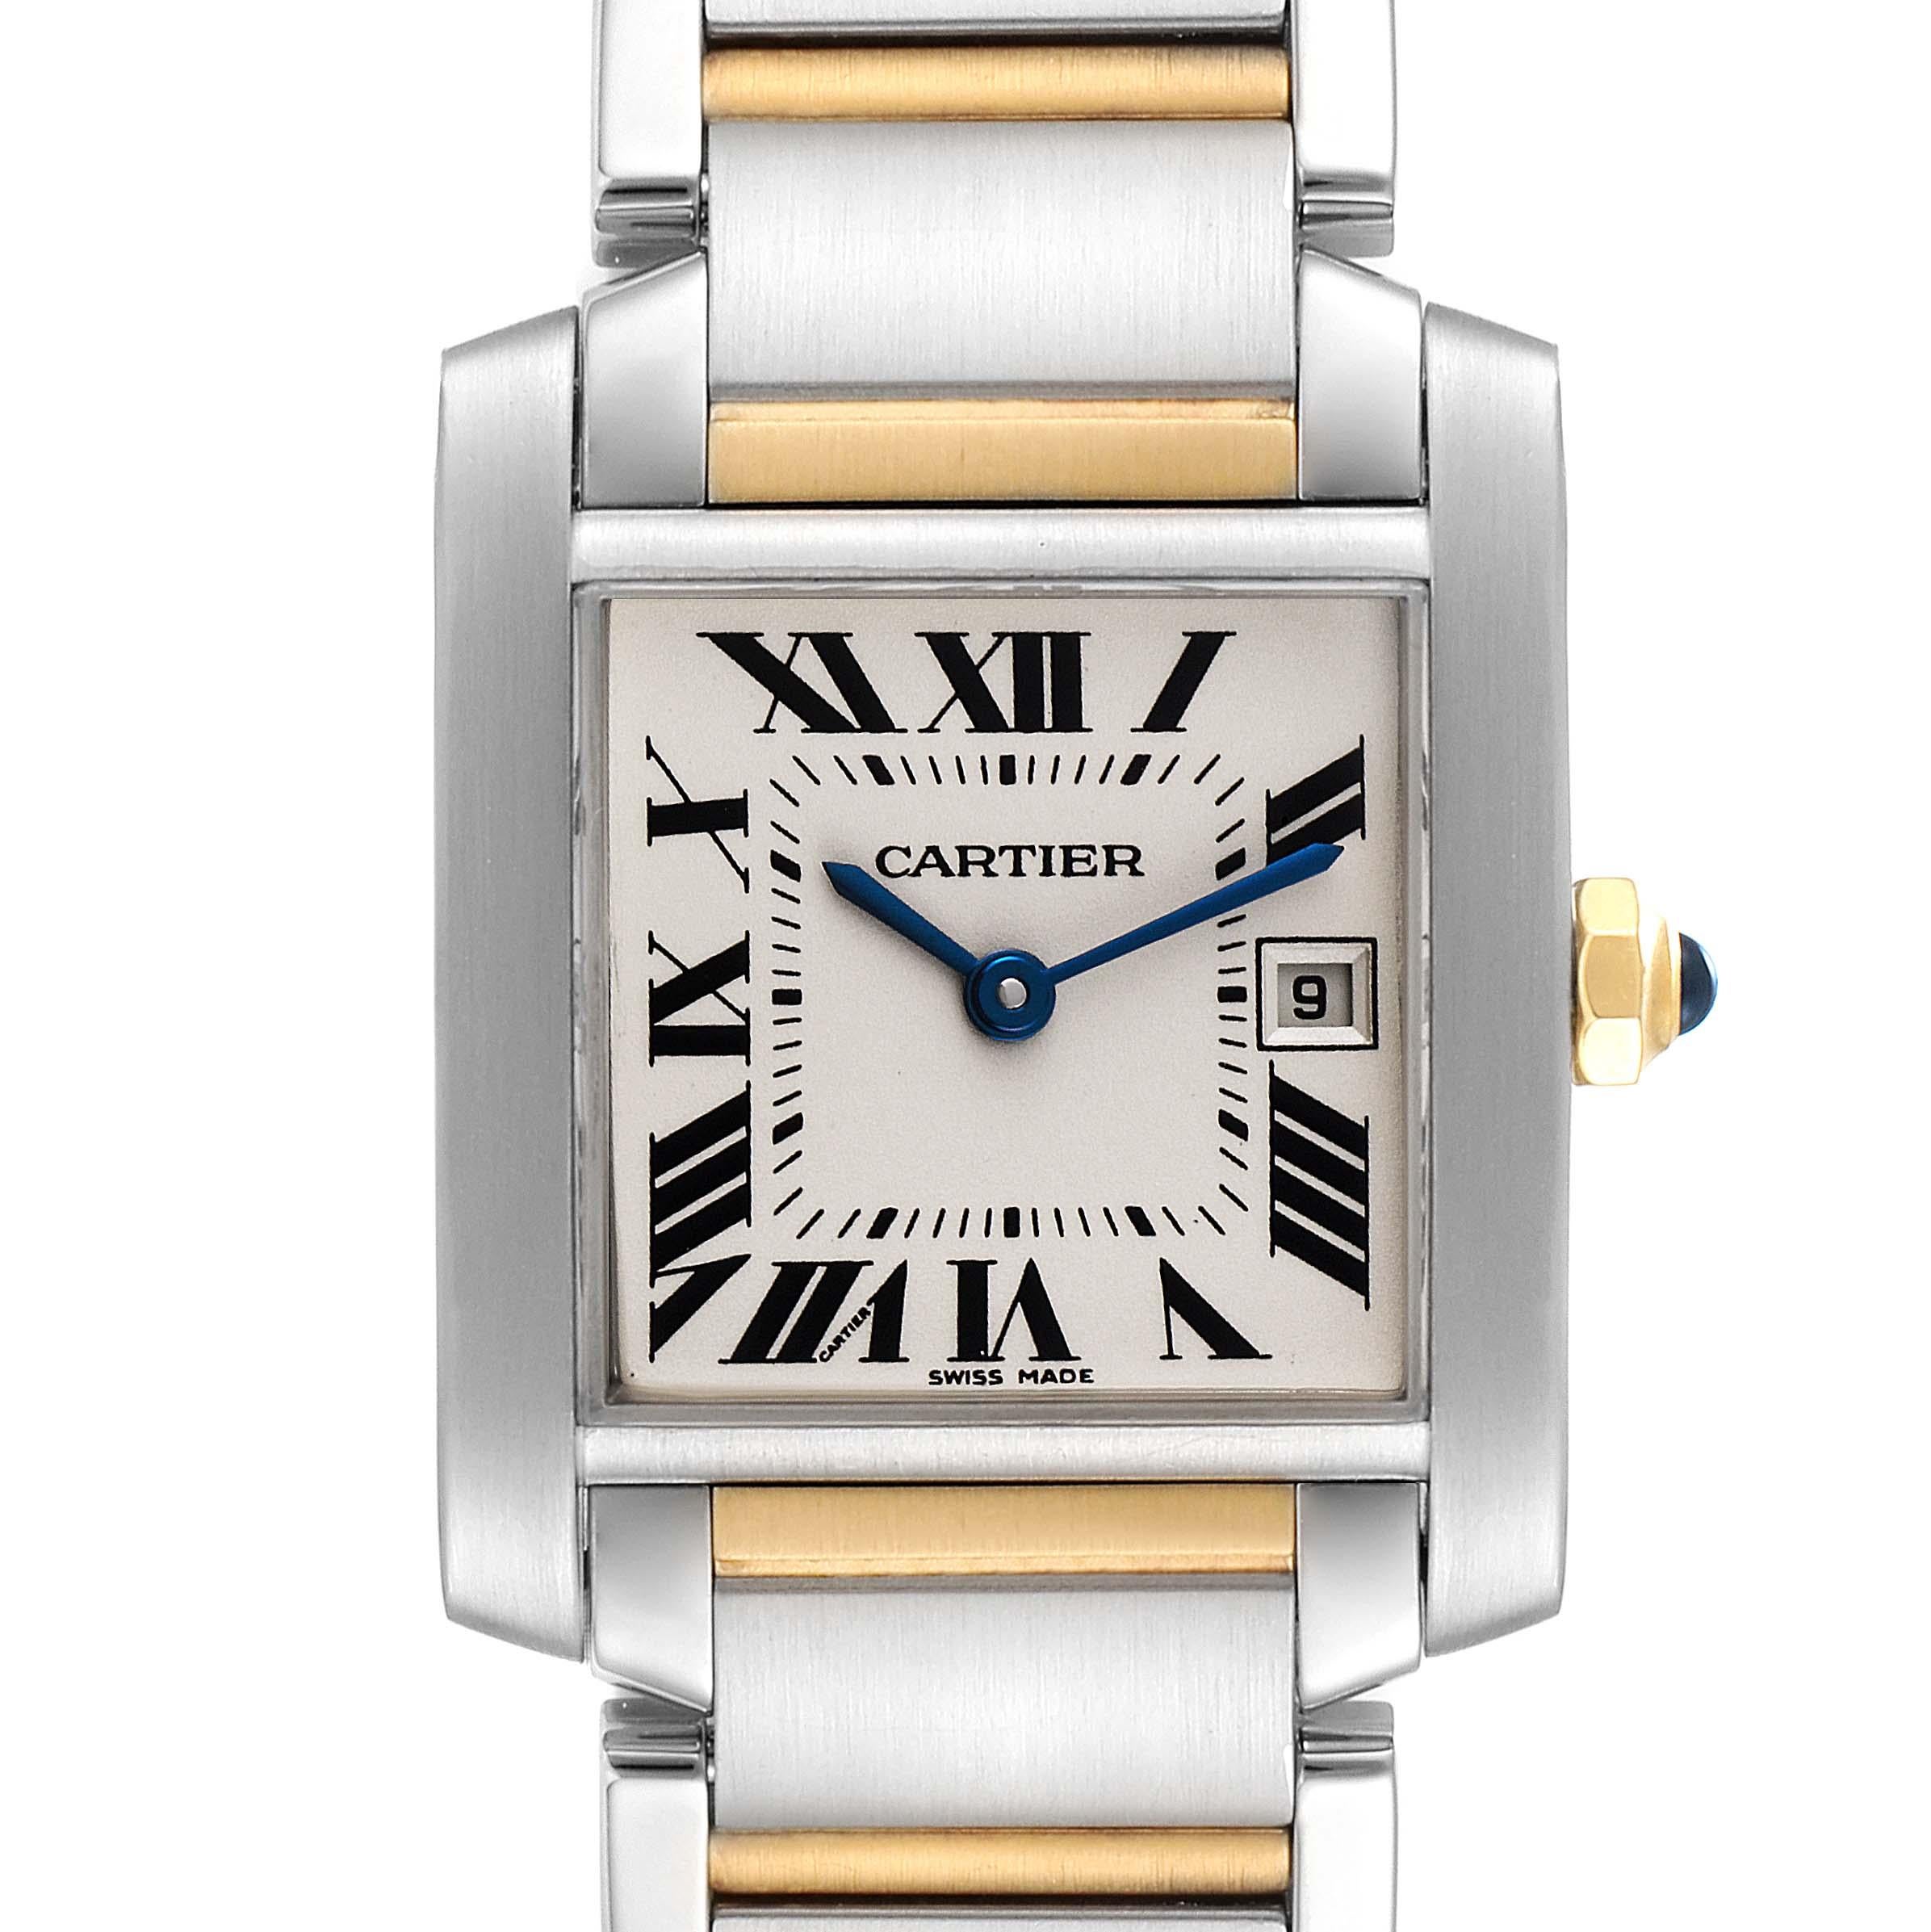 Cartier Tank Francaise Midsize Steel Yellow Gold Ladies Watch W51012Q4. Quartz movement. Rectangular stainless steel 25.0 x 30.0 mm case. Octagonal 18k yellow gold crown set with a blue spinel cabochon. . Scratch resistant sapphire crystal. Silvered